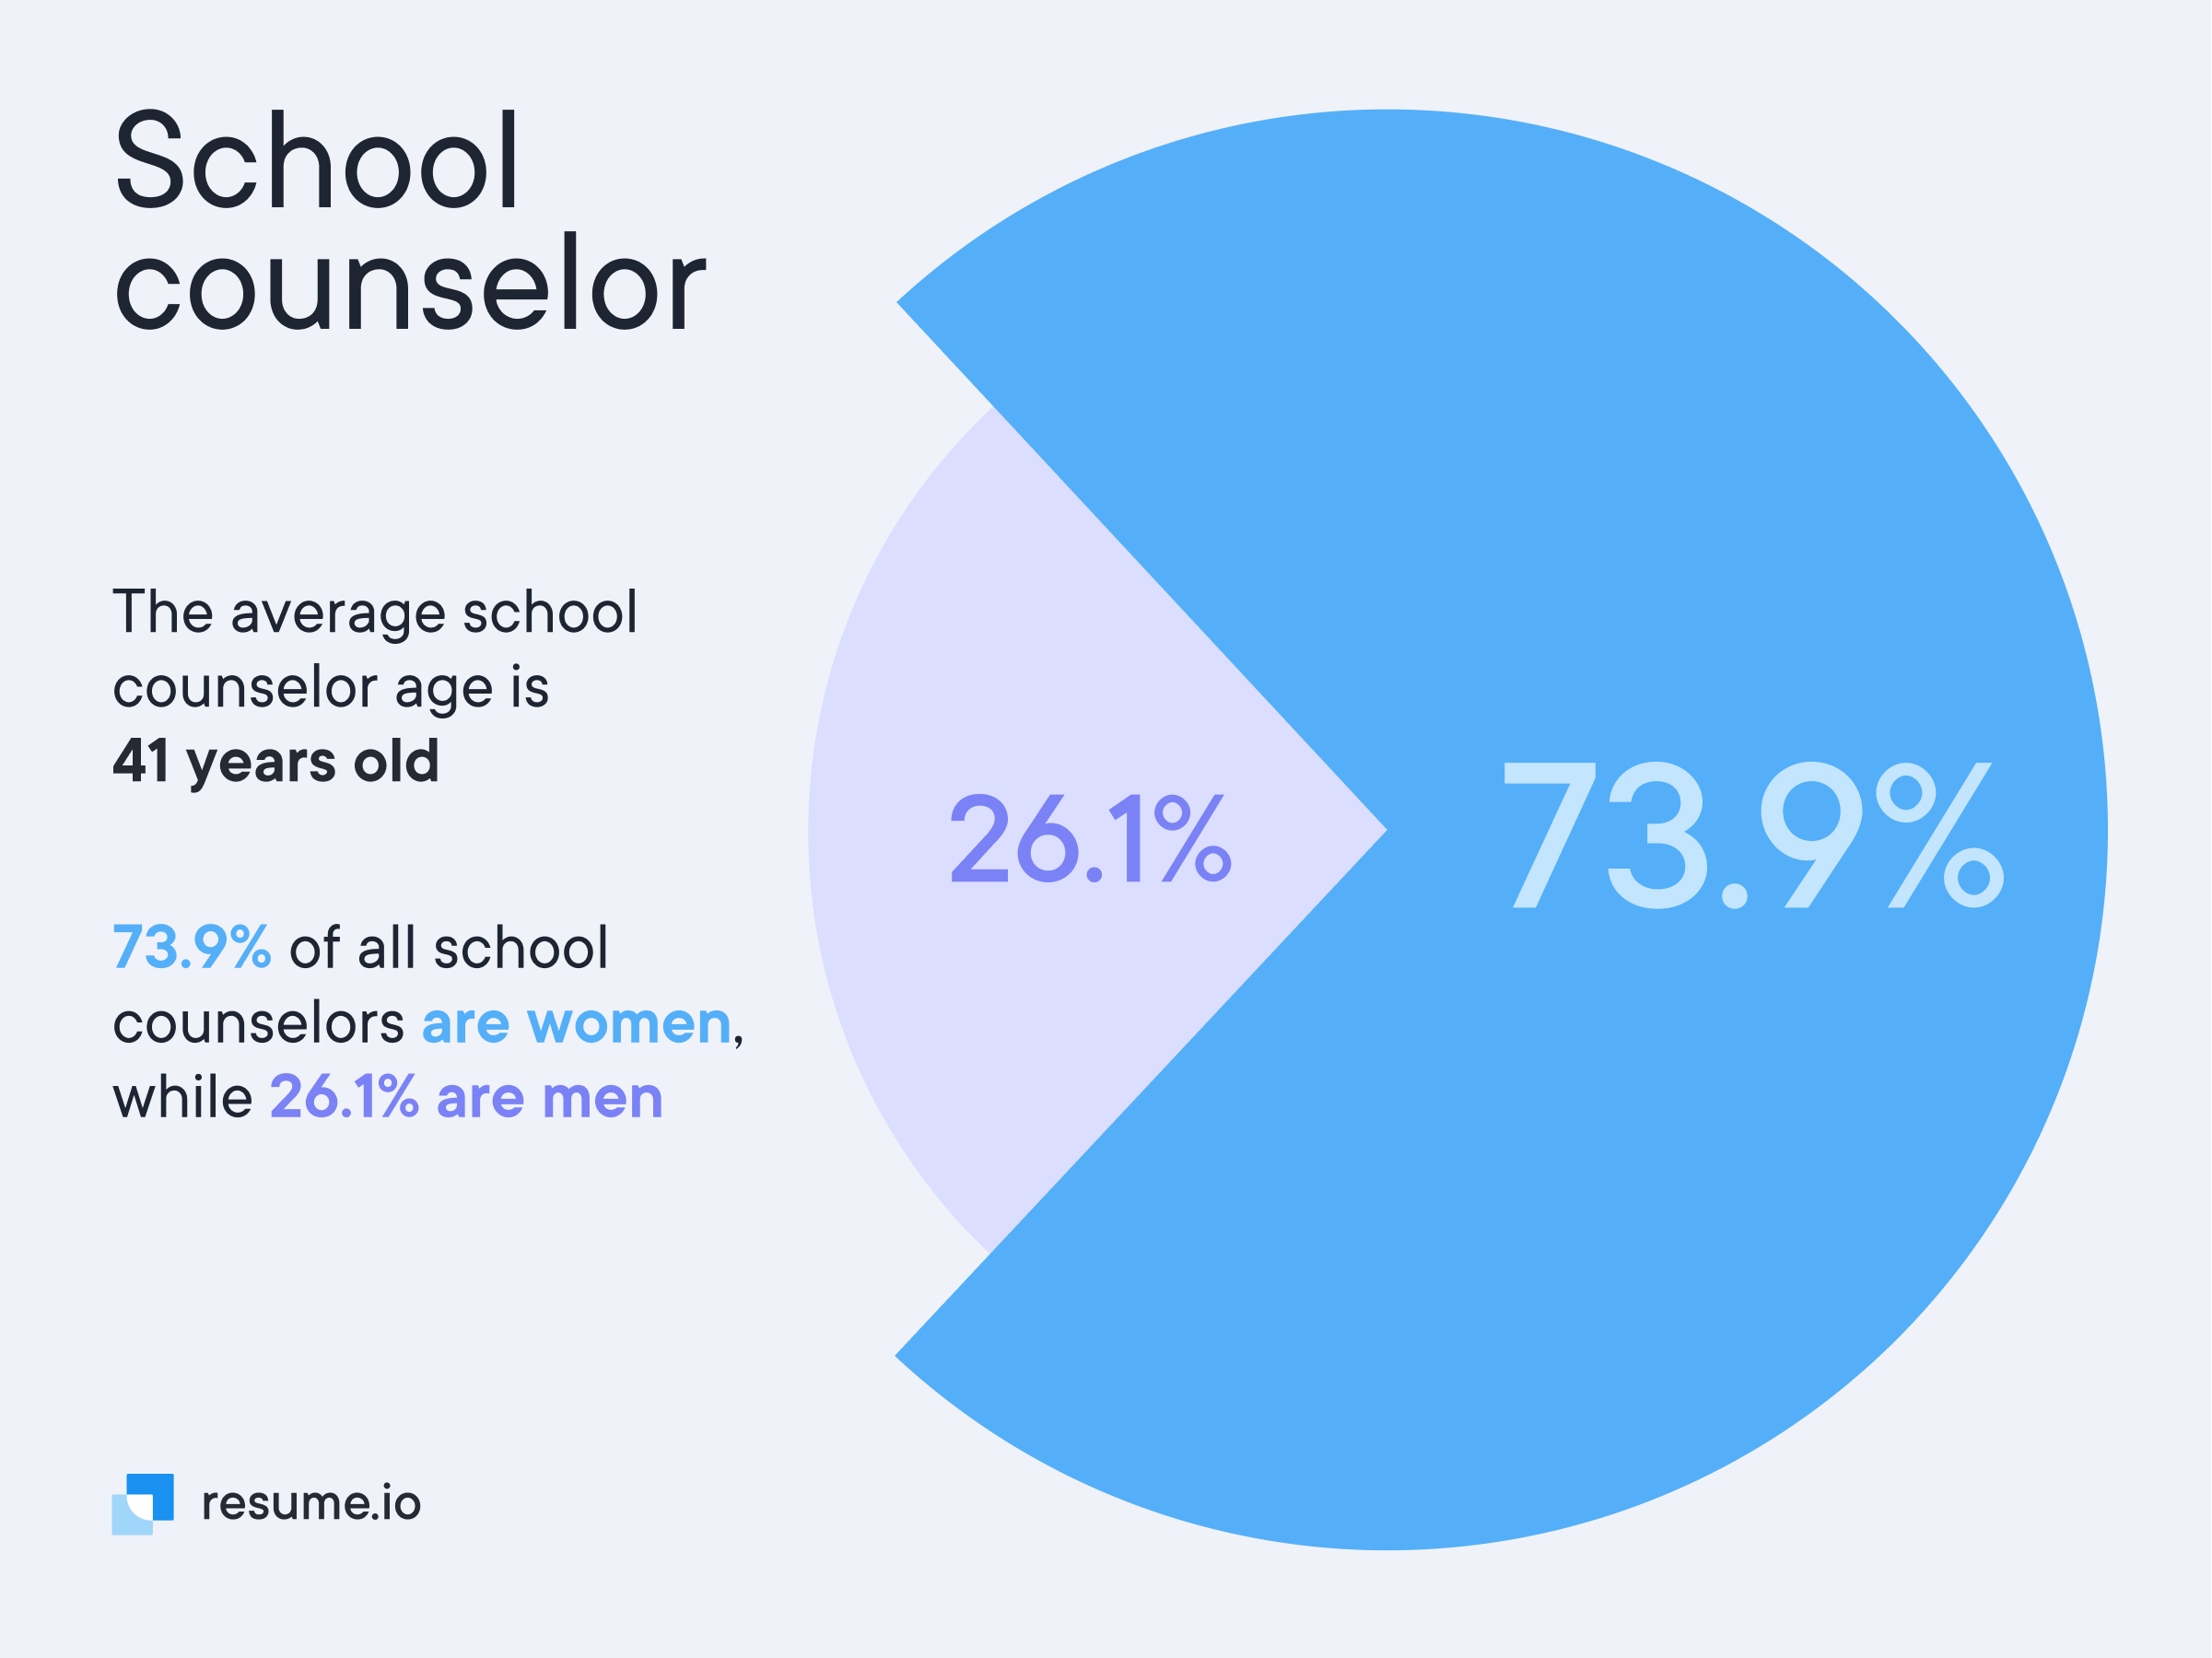 Pie chart with school counselor facts